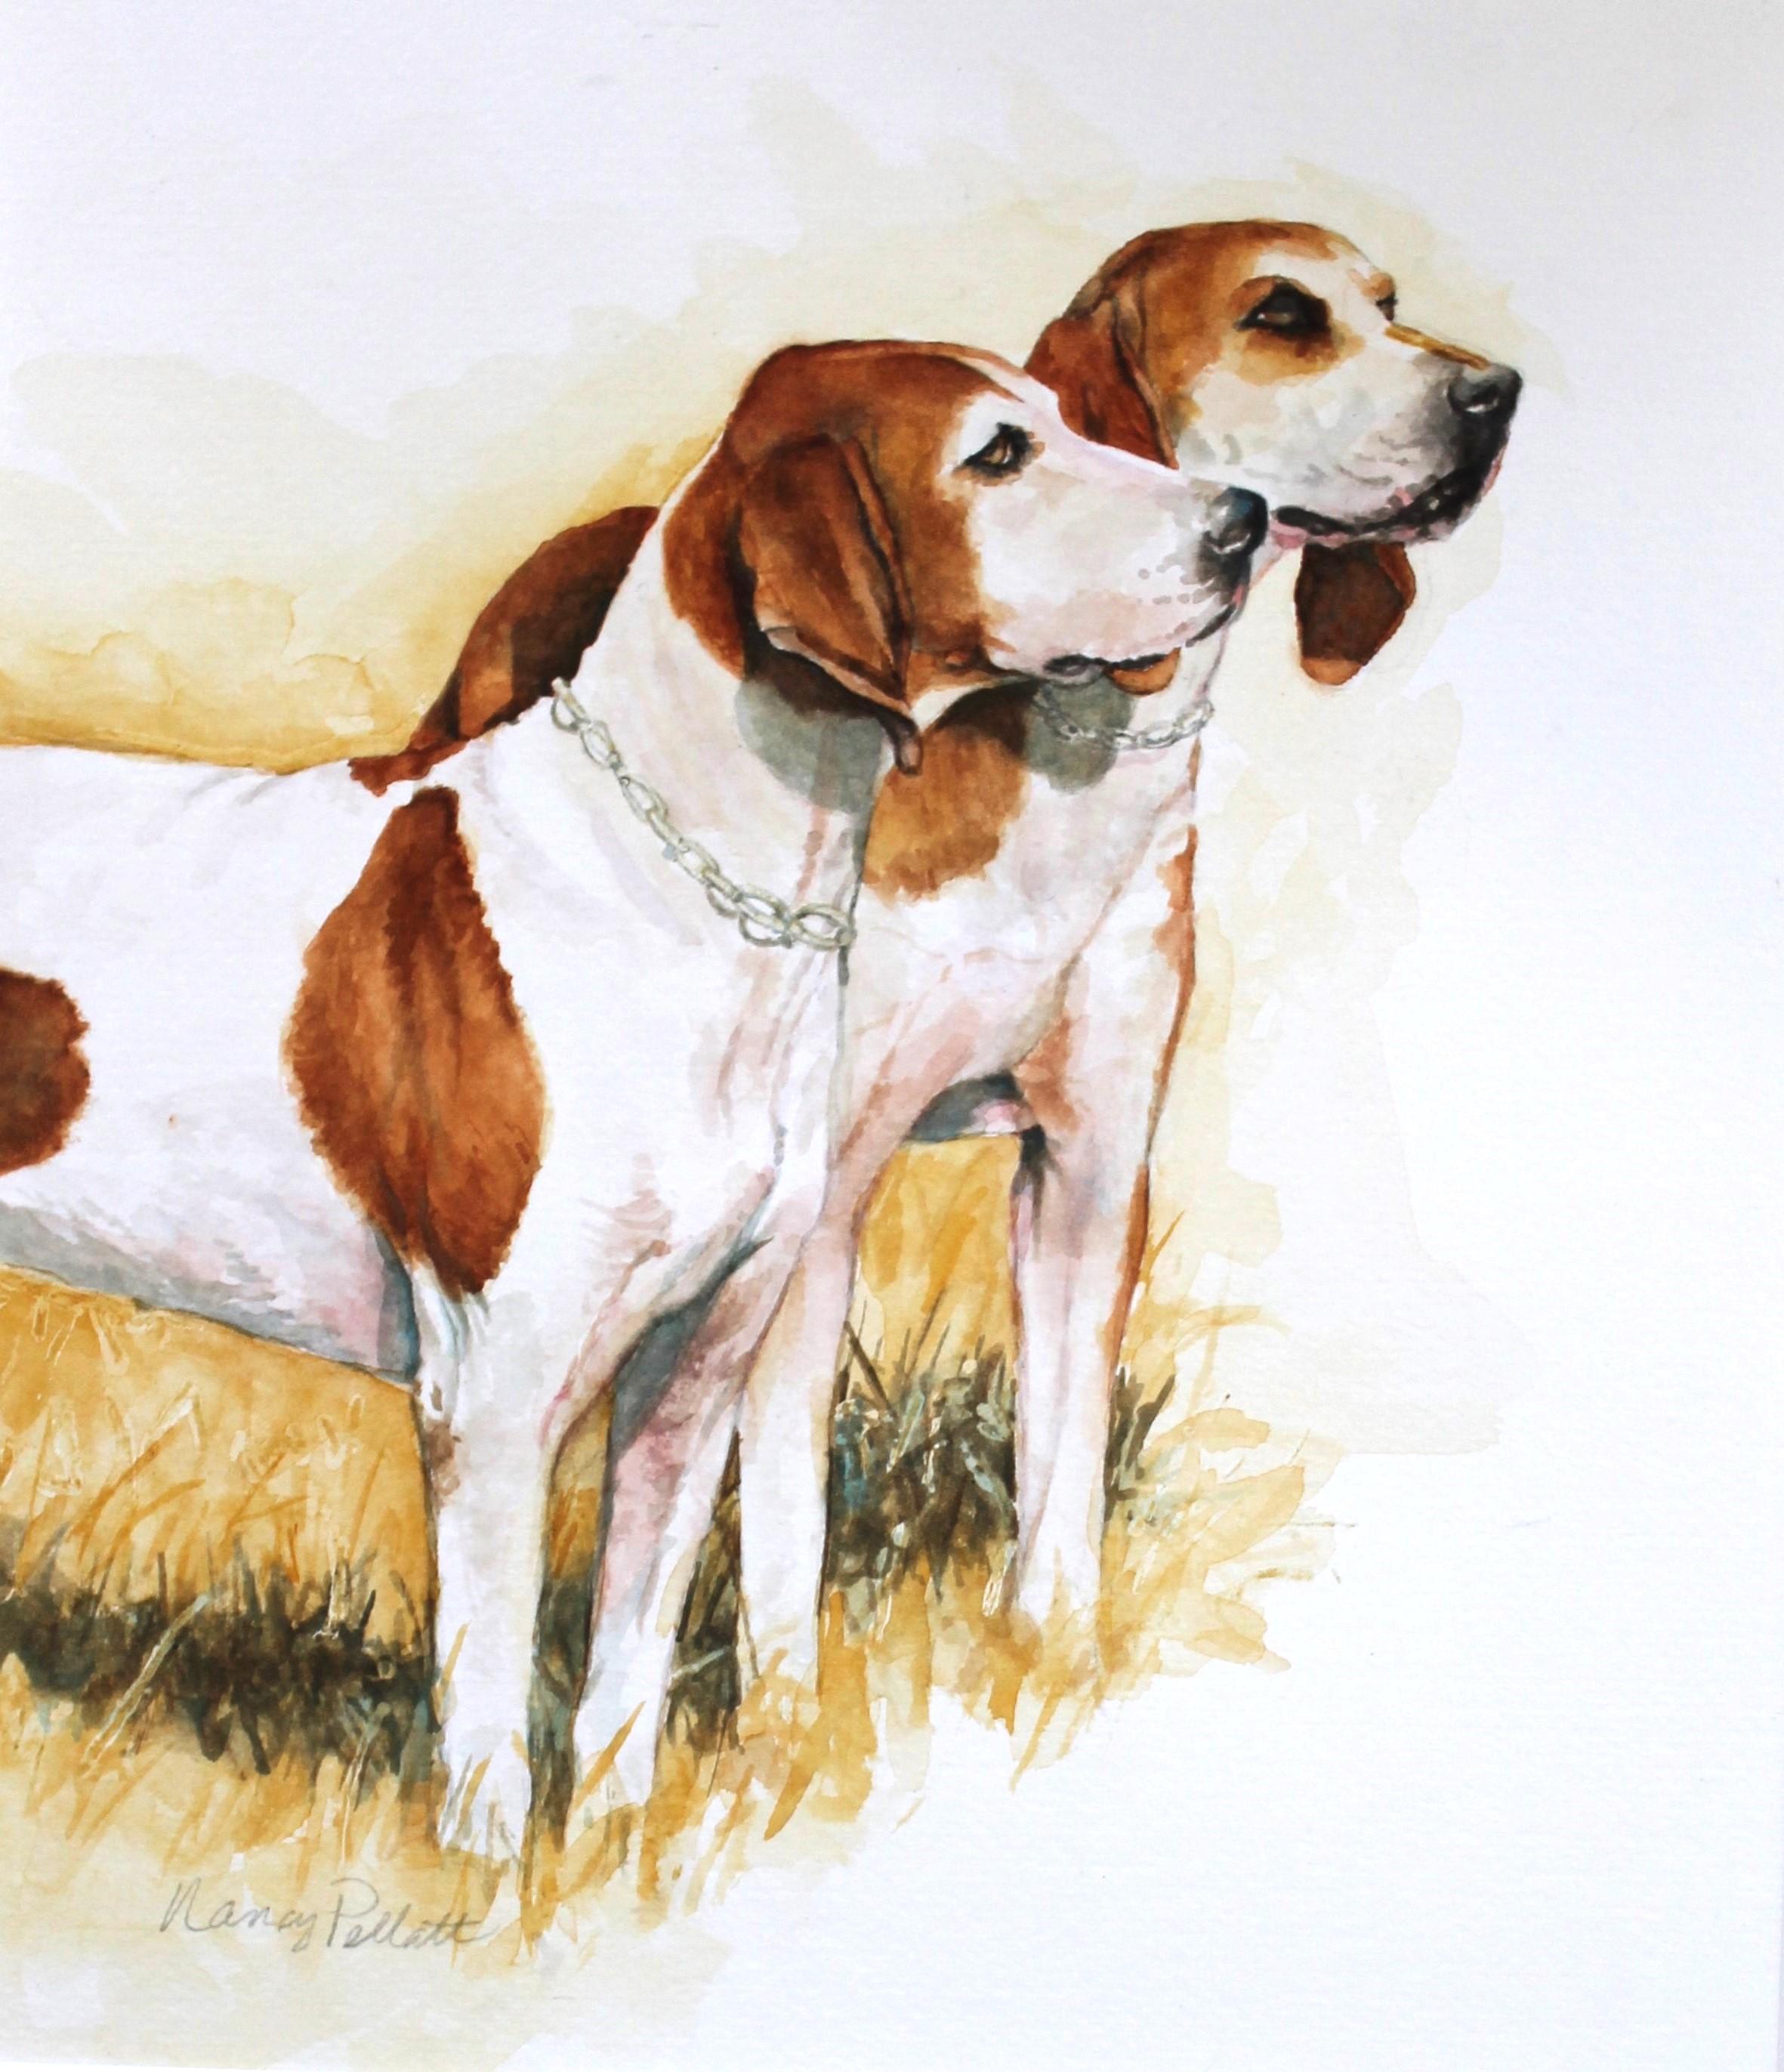 Nancy Pellatt Animal Art - Detailed dog watercolor painting of two obedient foxhounds standing at attention